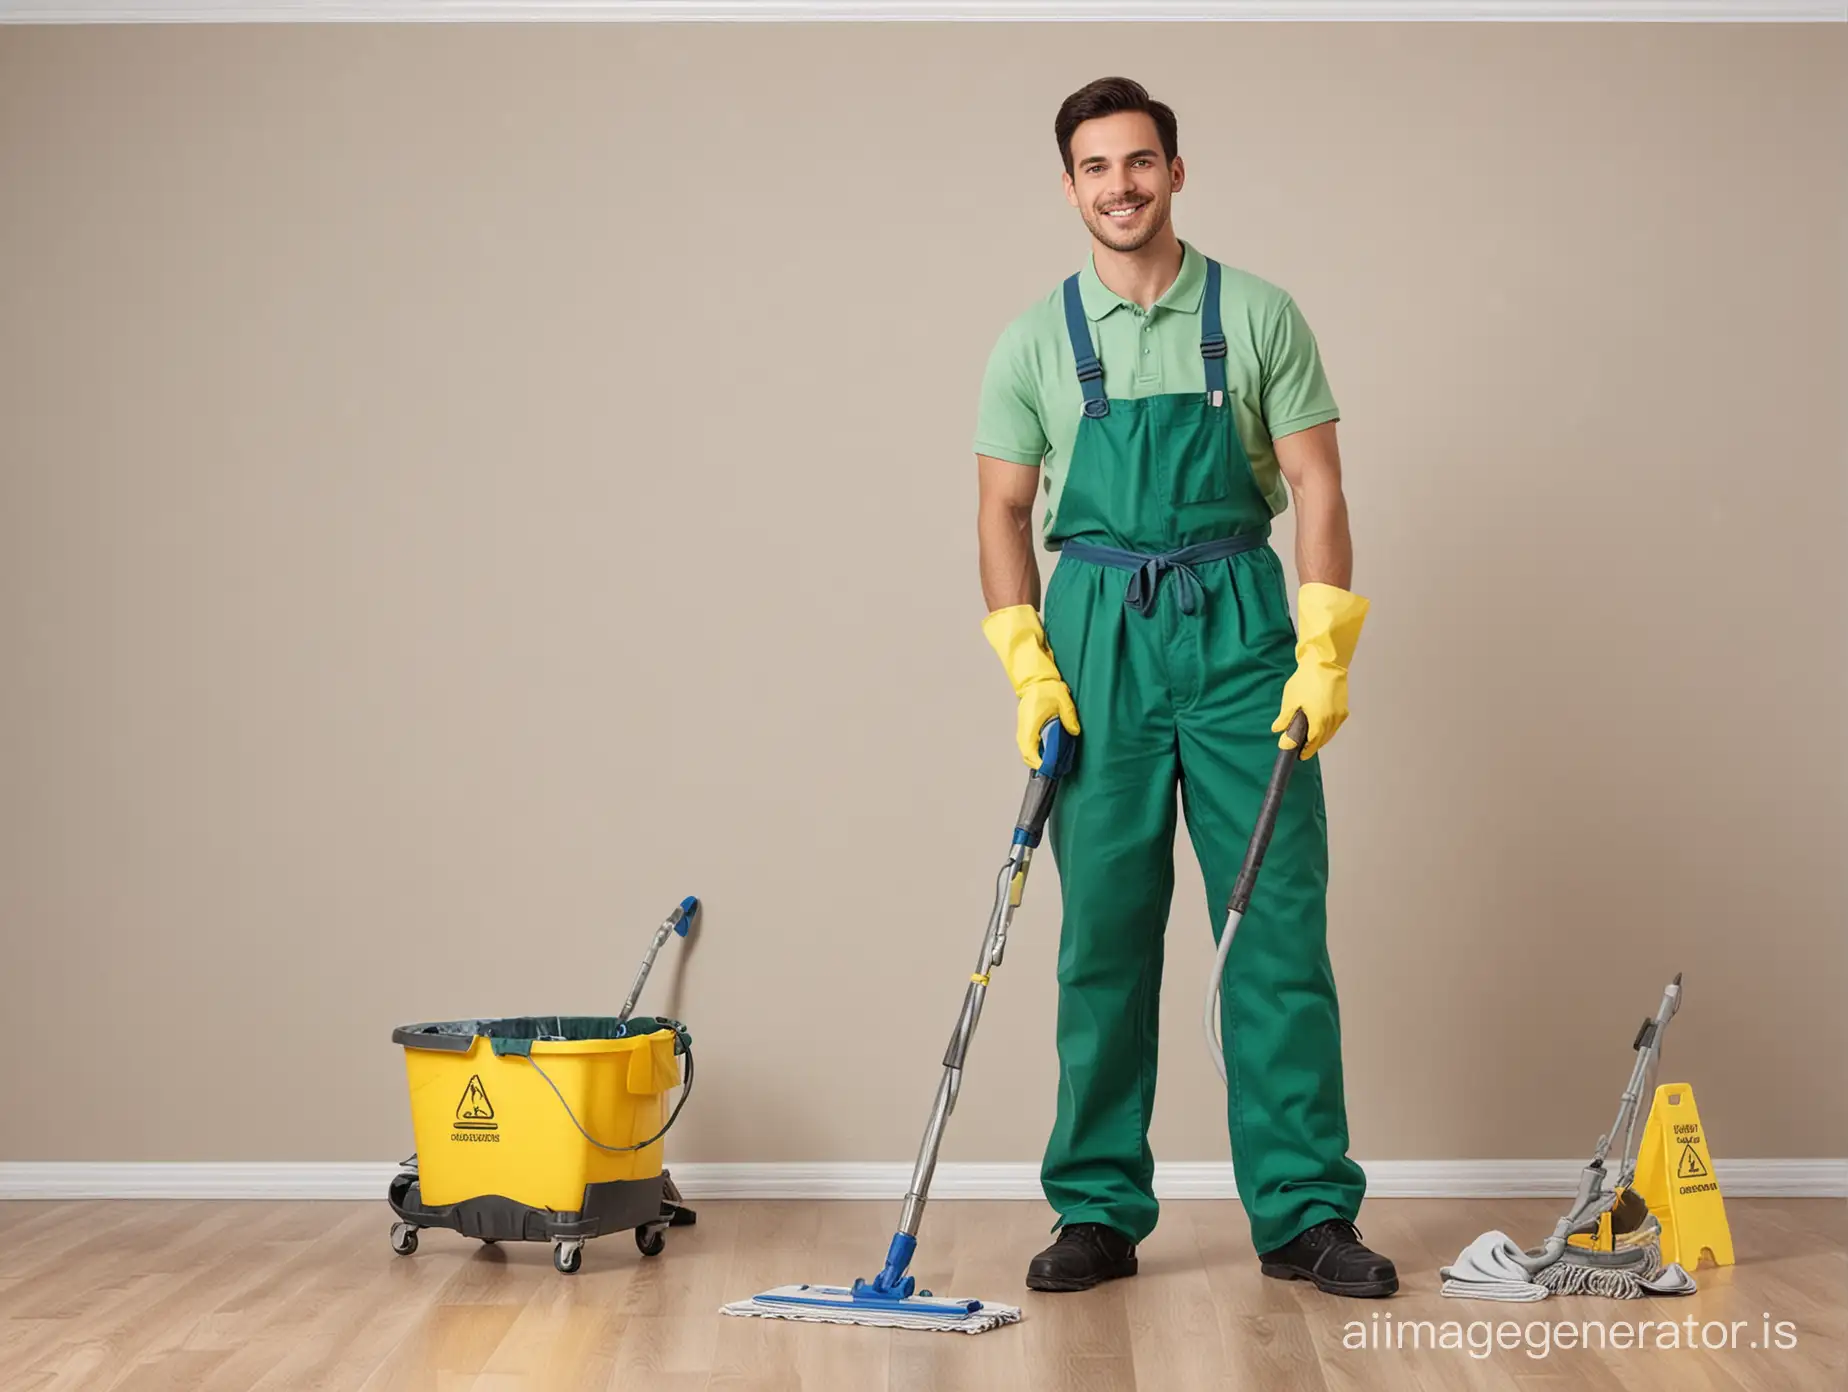 photo on the banner of the main page of the cleaning company's website